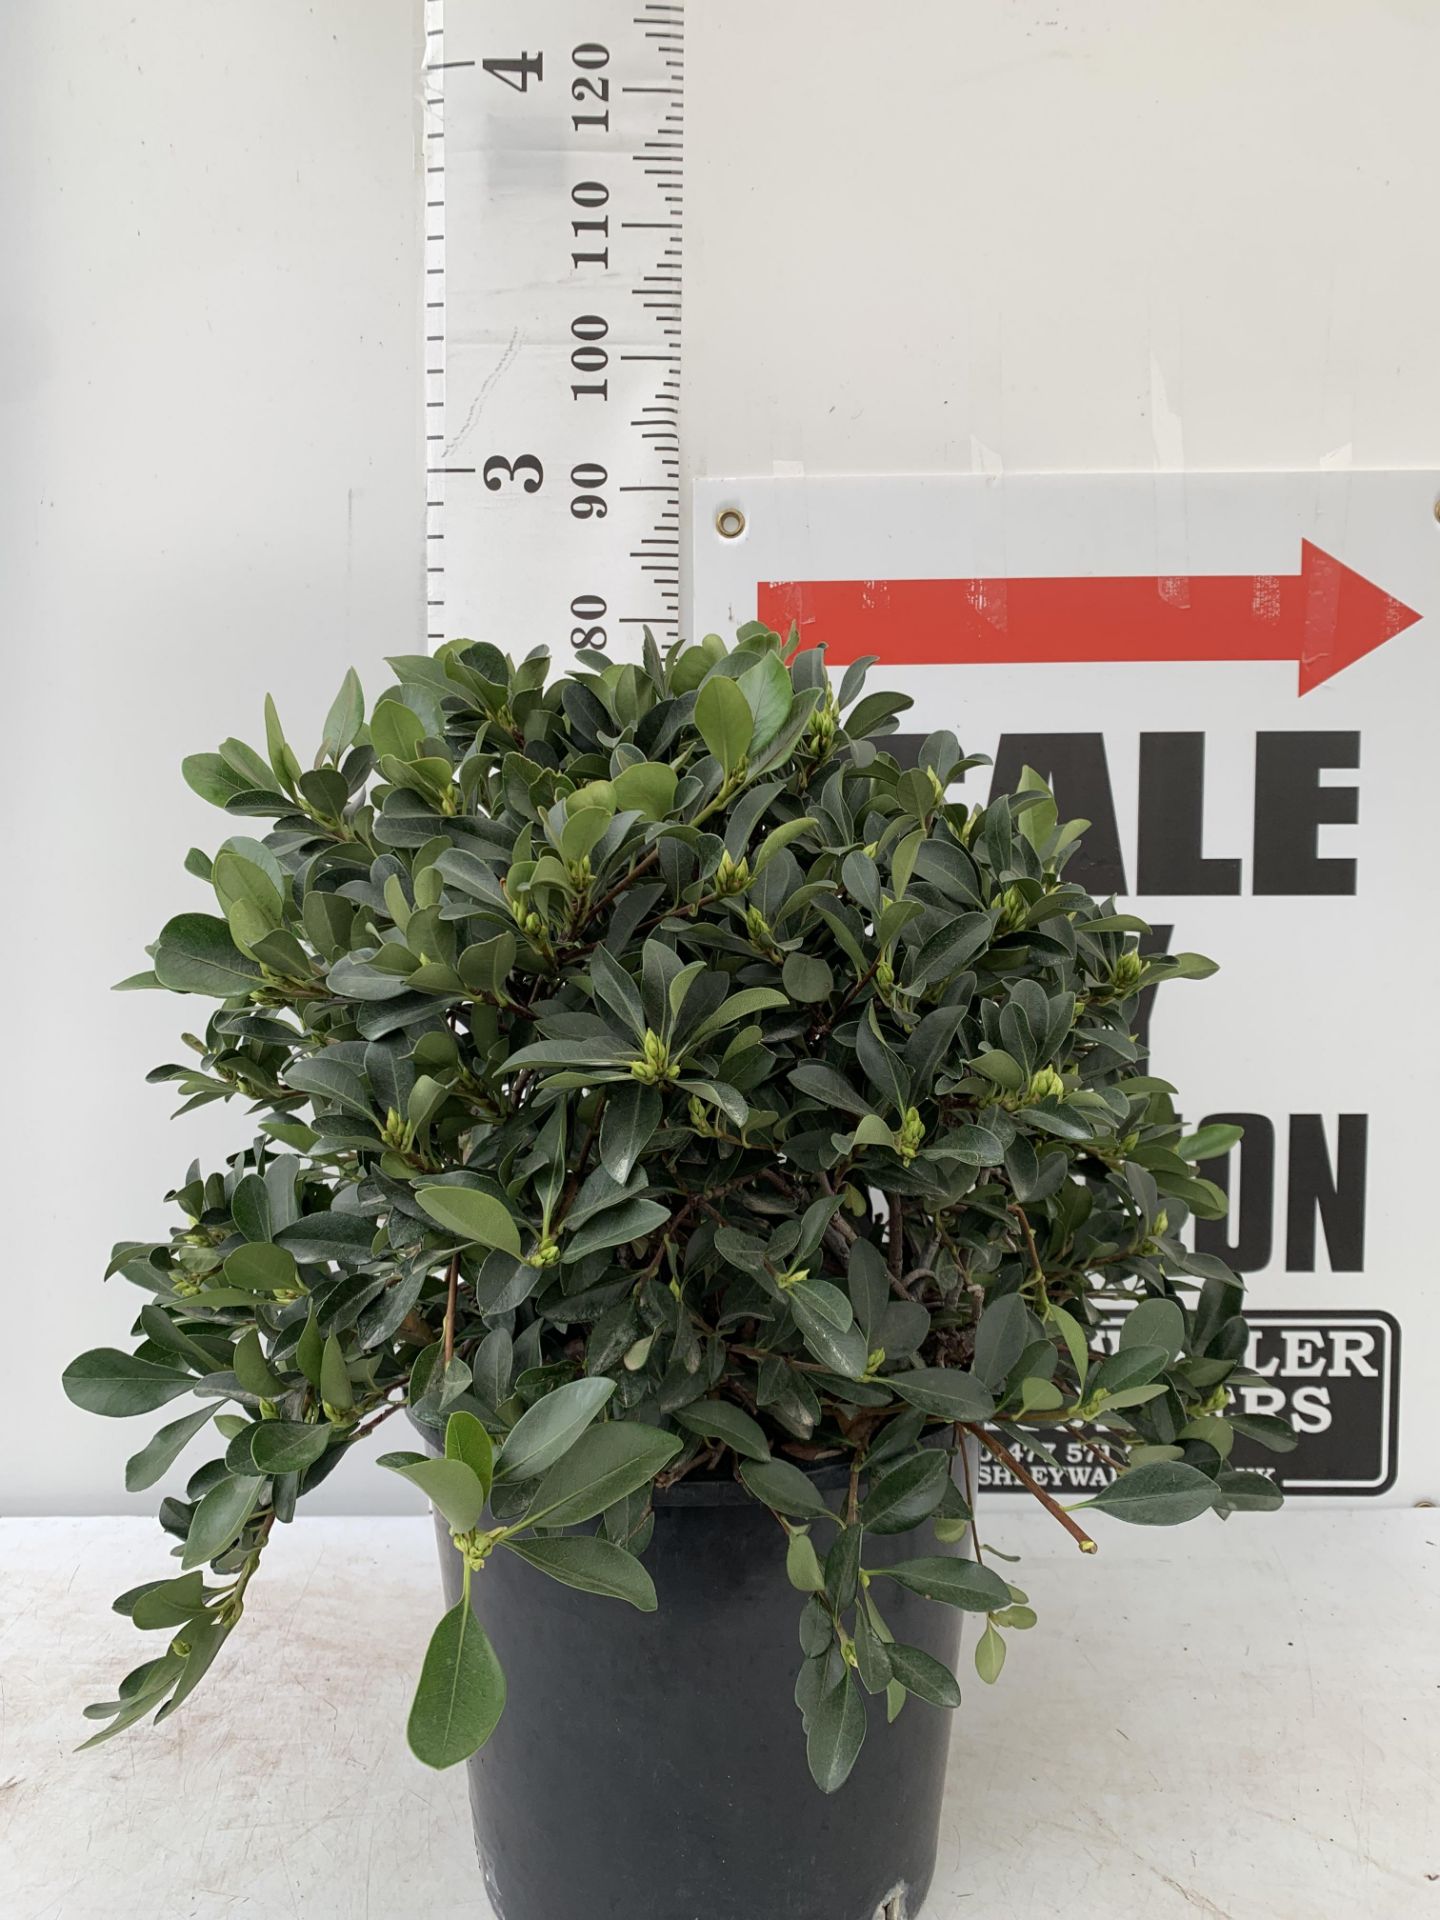 ONE RHAPHIOLEPIS UMBELLATA BUSH APPROX 80CM IN HEIGHT IN A 15 LTR POT PLUS VAT